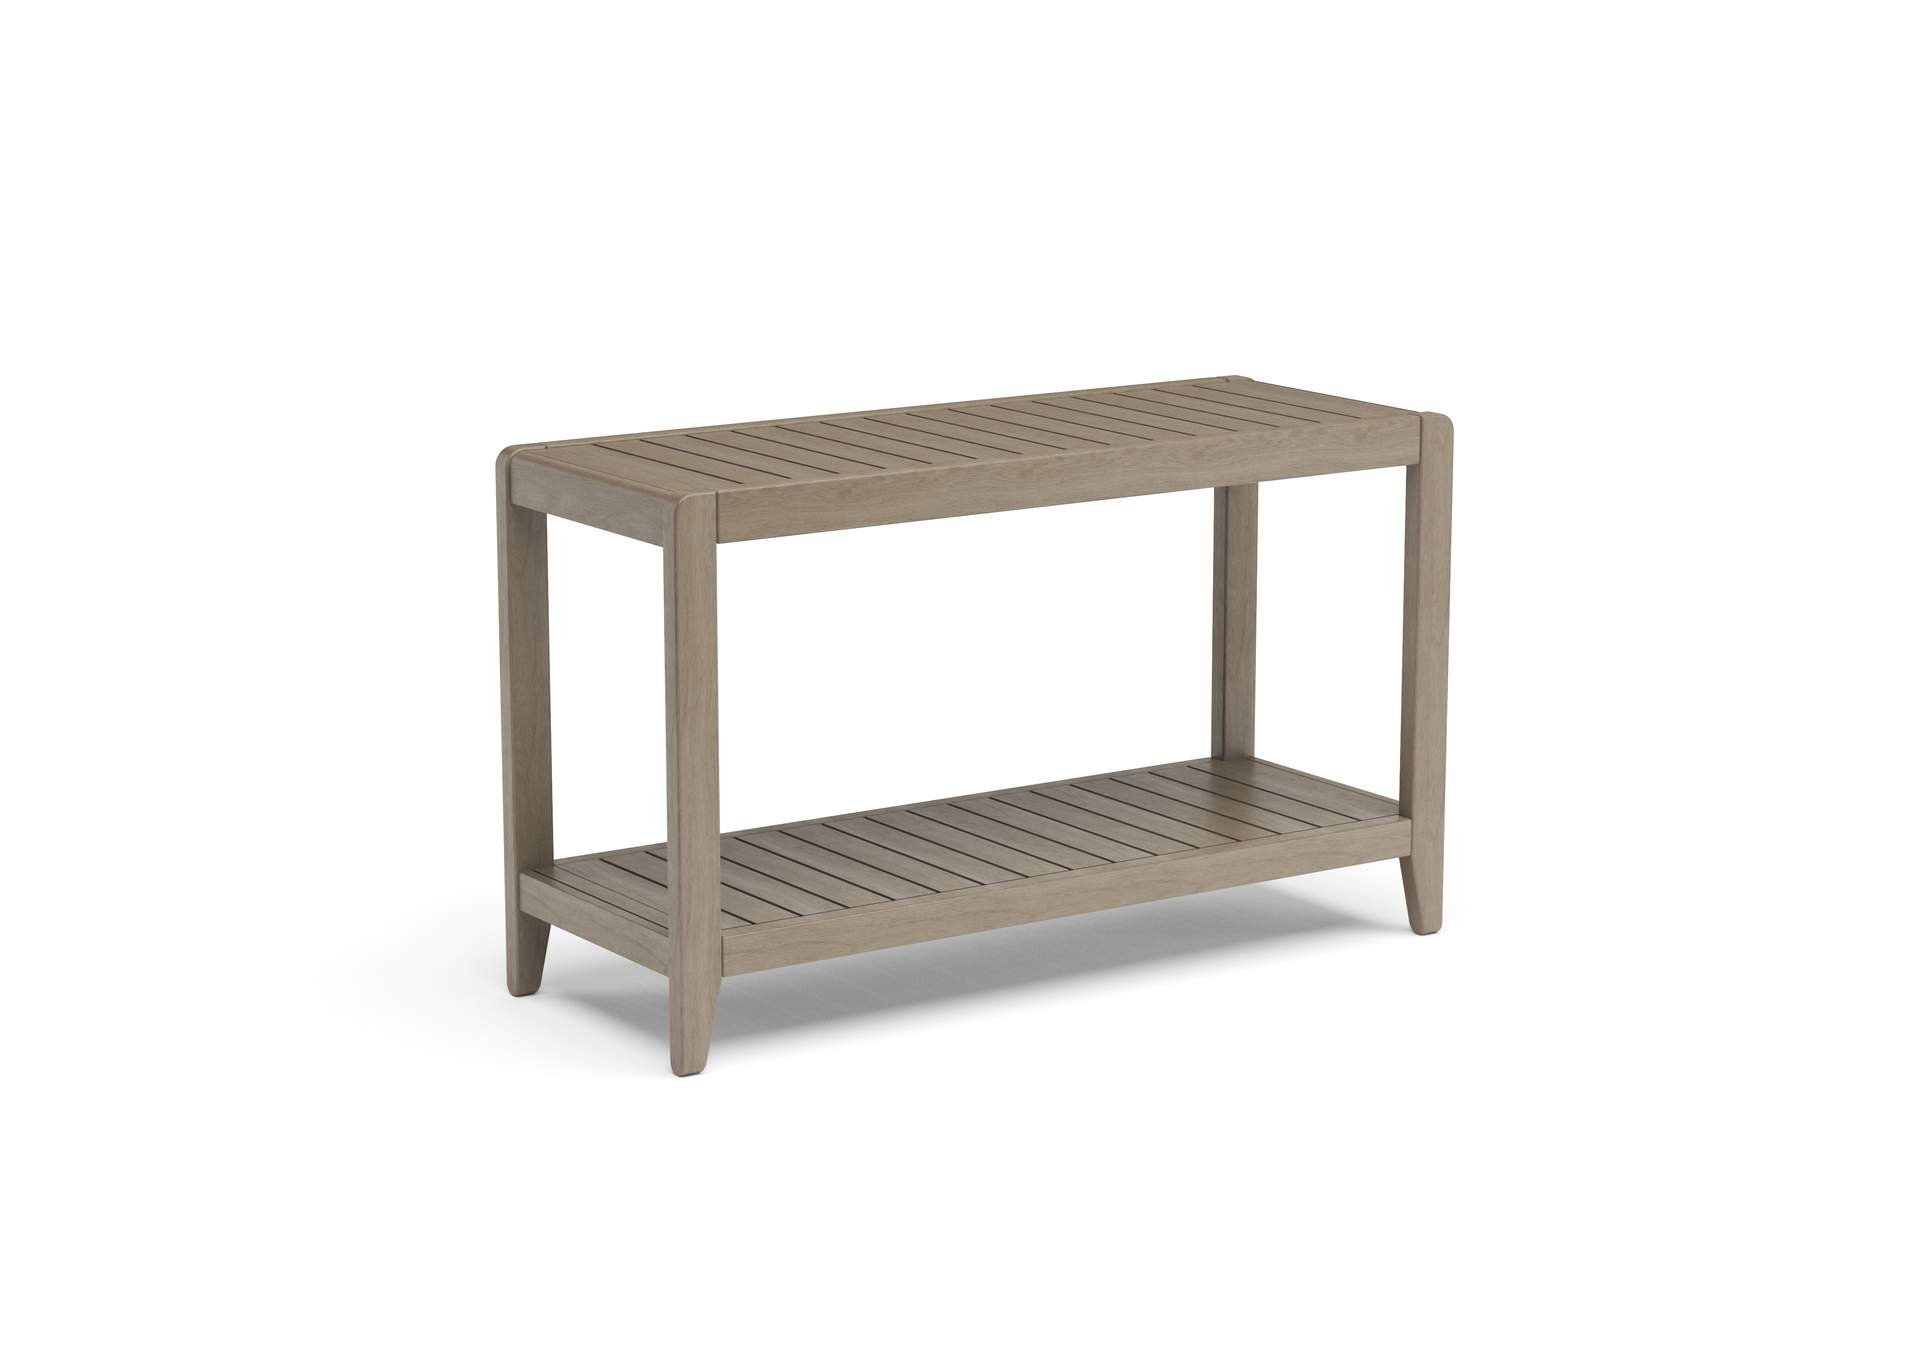 Sustain Outdoor Sofa Table By Homestyles,Homestyles